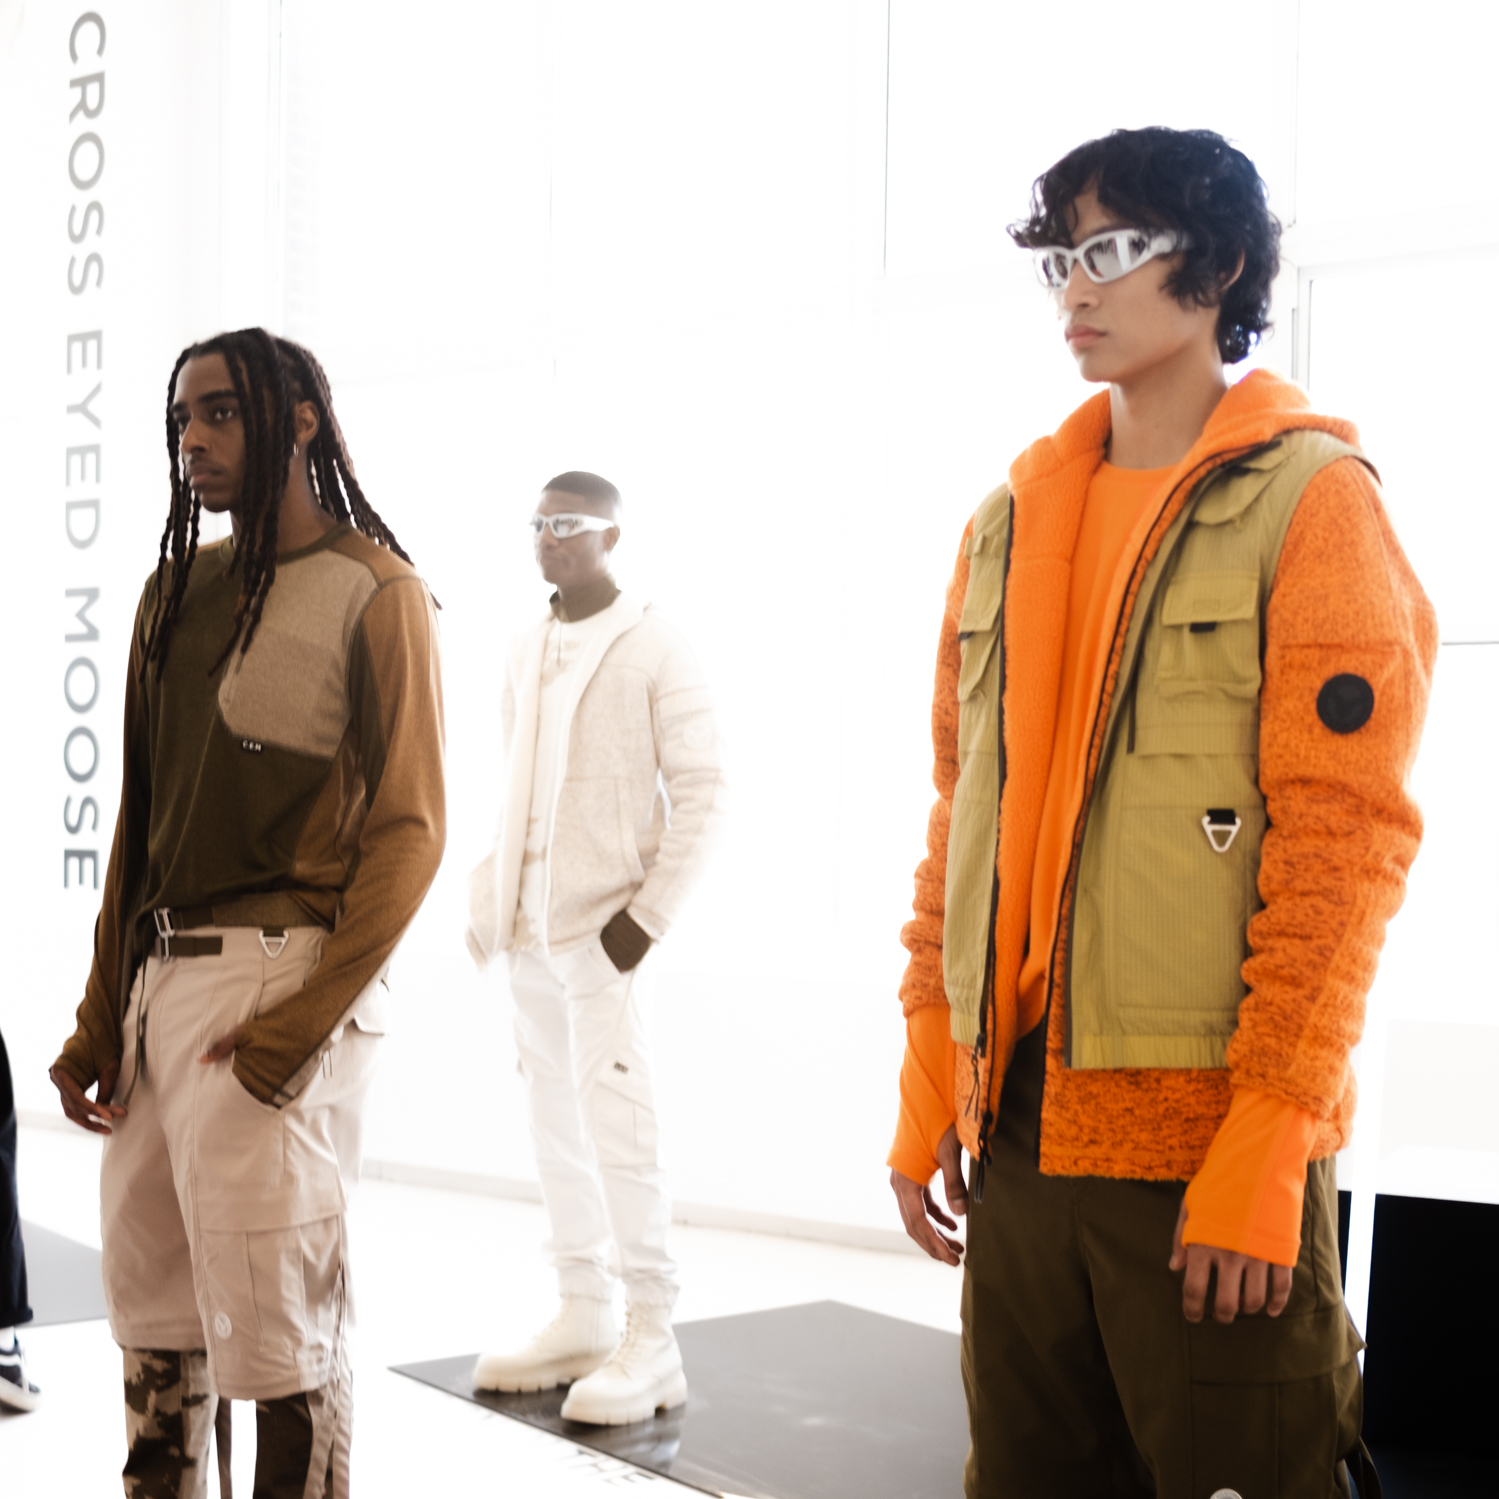 Three models are pictured. The model to the right is wearing an orange jacket, a brown vest, brown pants, brown boots and white sunglasses. The model to the left is wearing a brown shirt, brown and beige pants and brown shoes. The model in the middle is wearing all white — a shirt, a jacket, pants, boots and sunglasses.